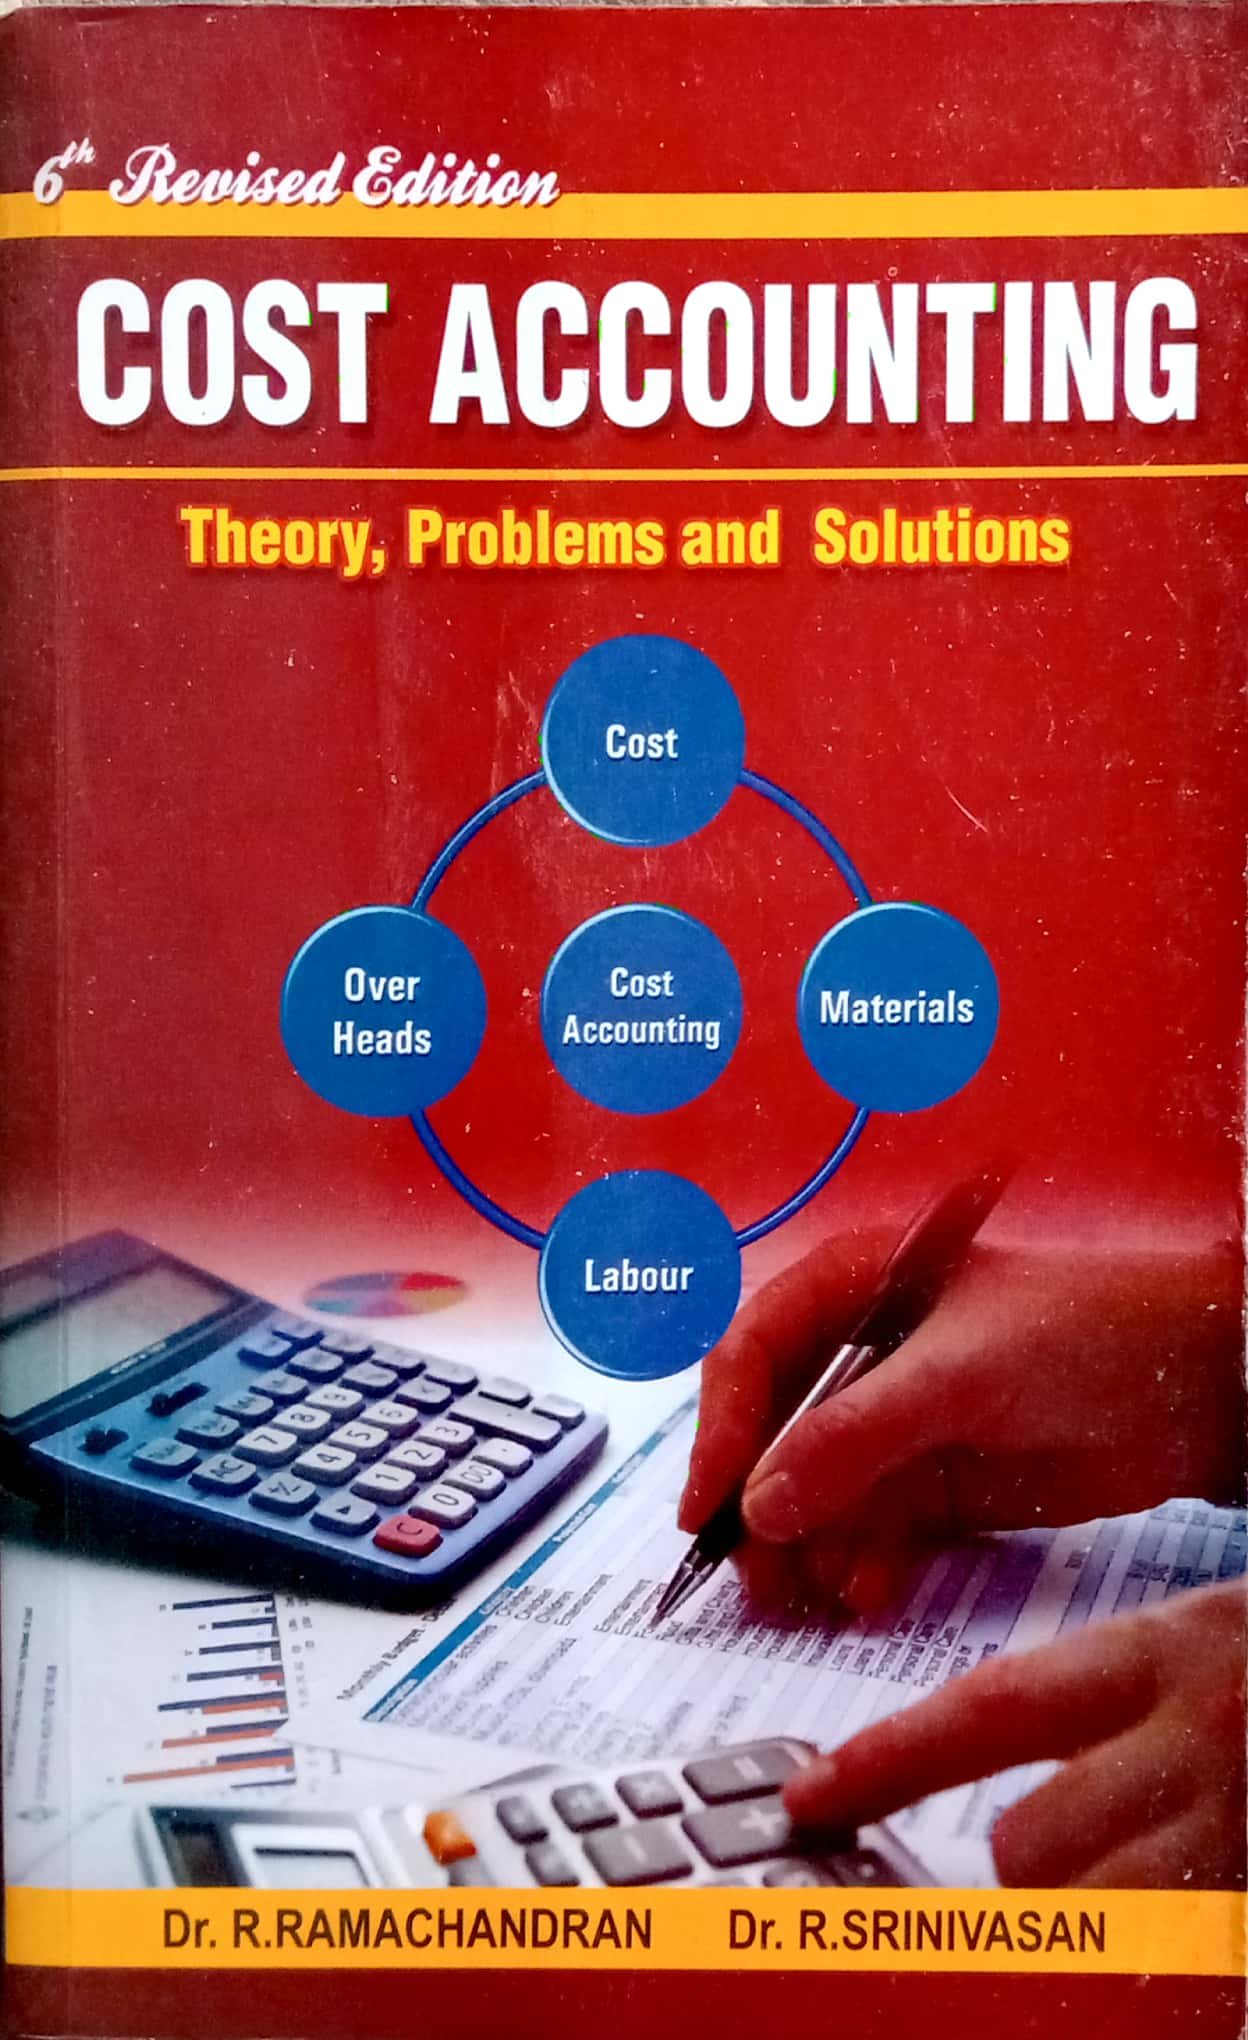 routemybook-buy-cost-accounting-theory-problems-and-solutions-6th-revised-edition-by-dr